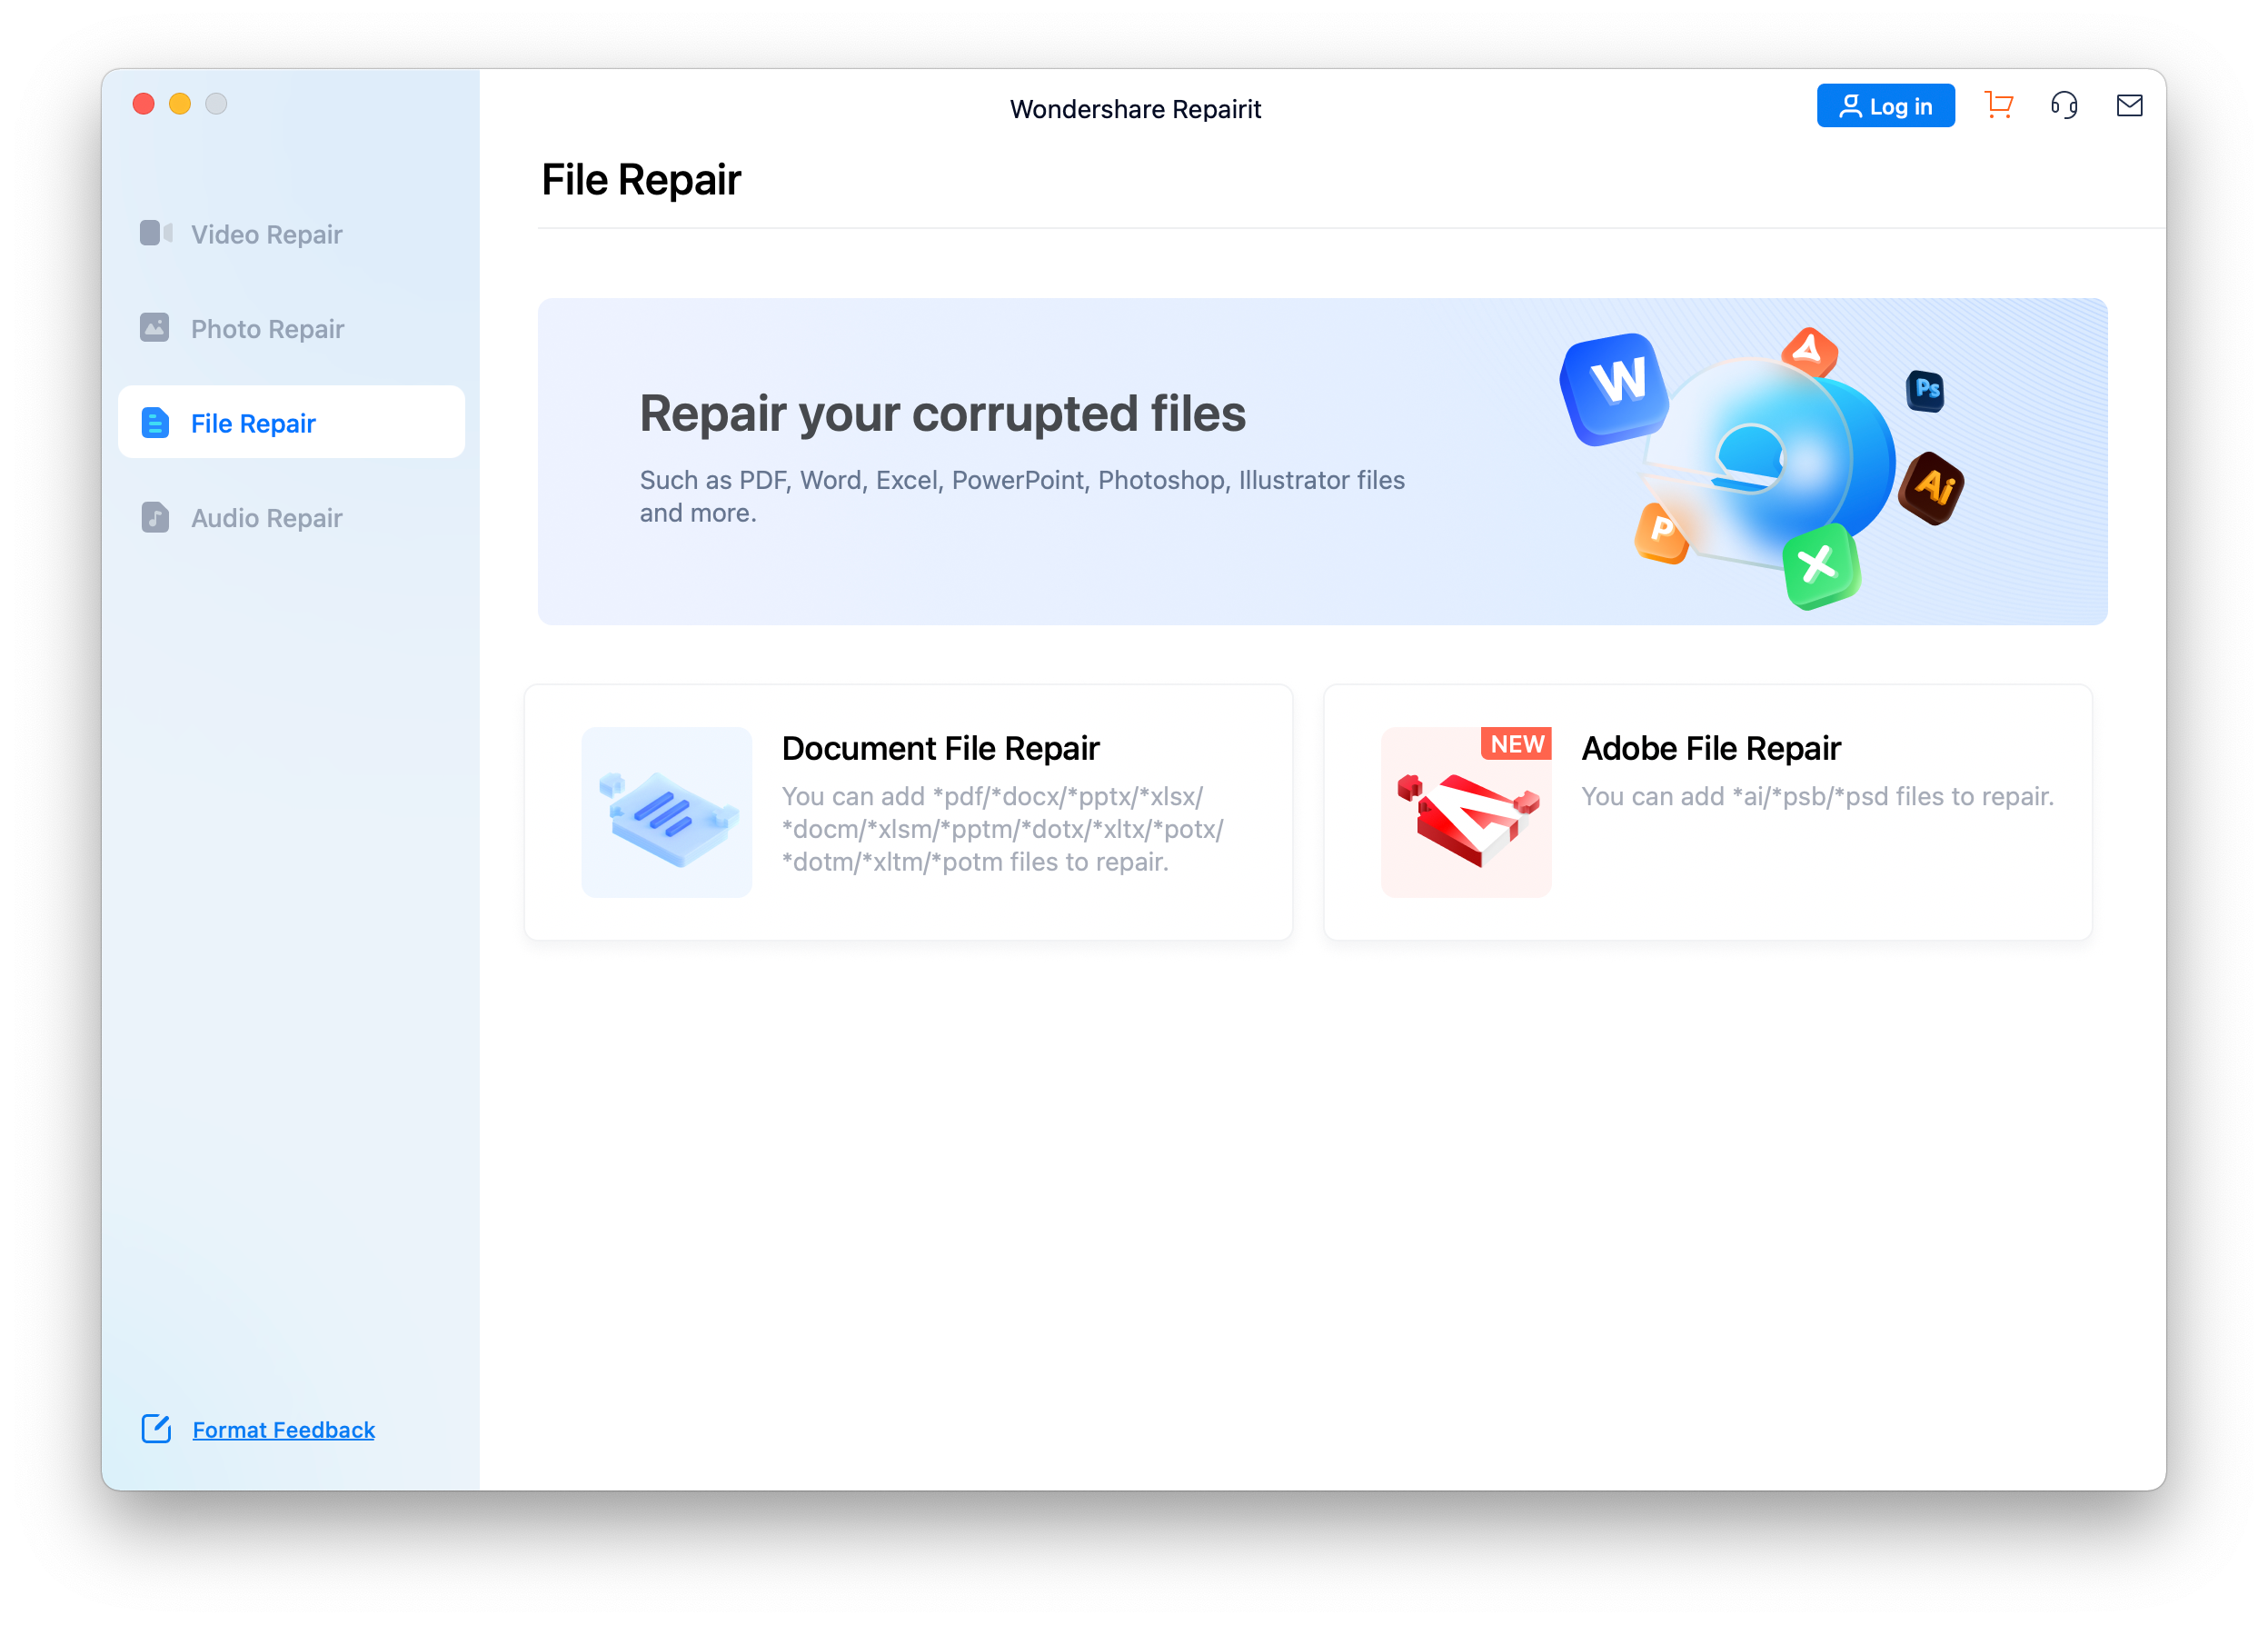 Locate the Wondershare Repairit icon on your desktop or in the Applications folder on your Mac.
Double-click on the icon to launch the software.